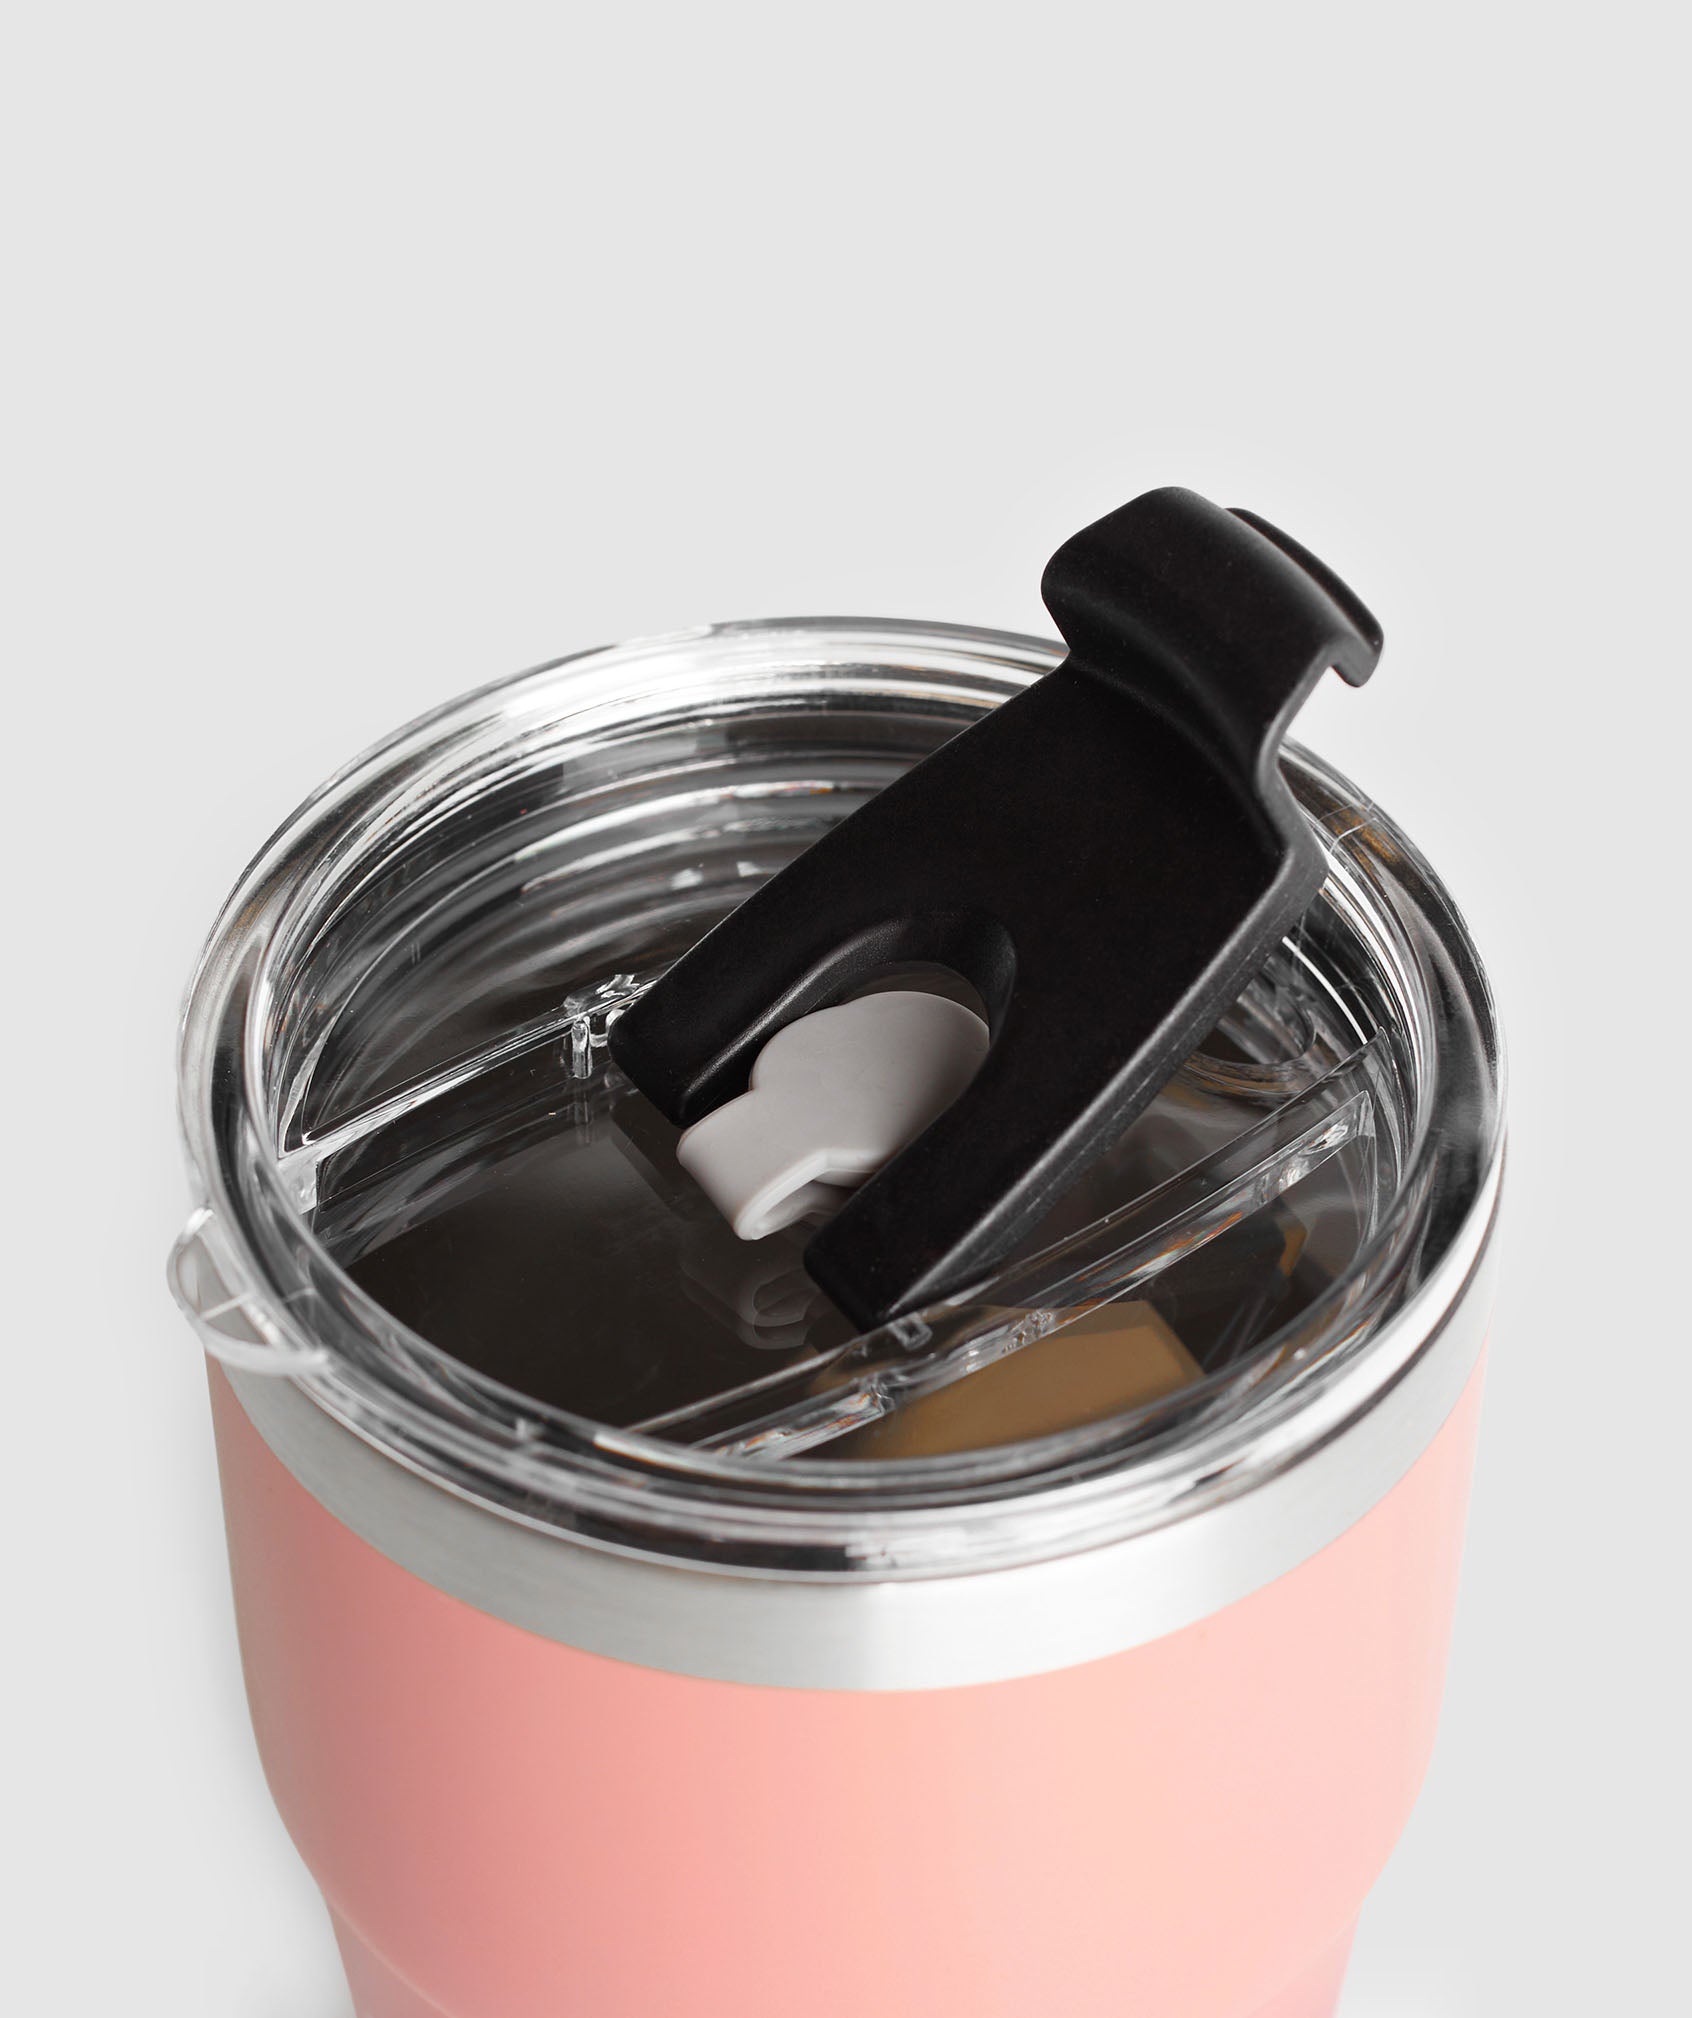 Insulated Straw Cup